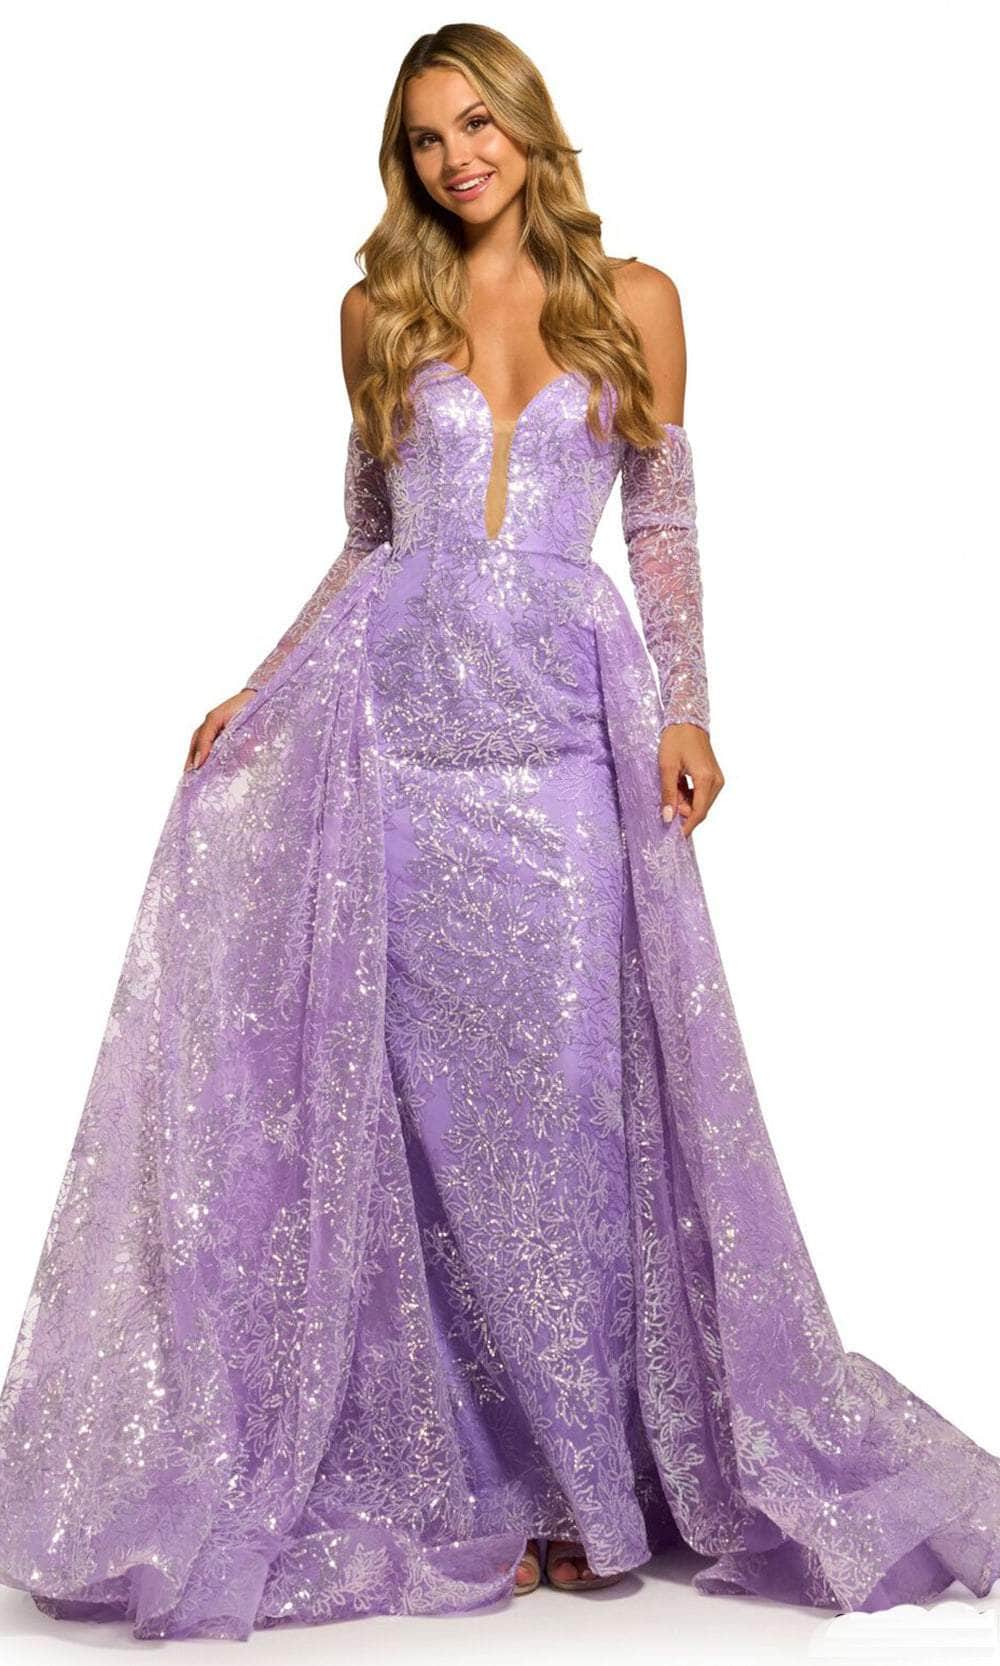 Image of Sherri Hill 55385 - Sequin Lace Prom Gown With Overskirt